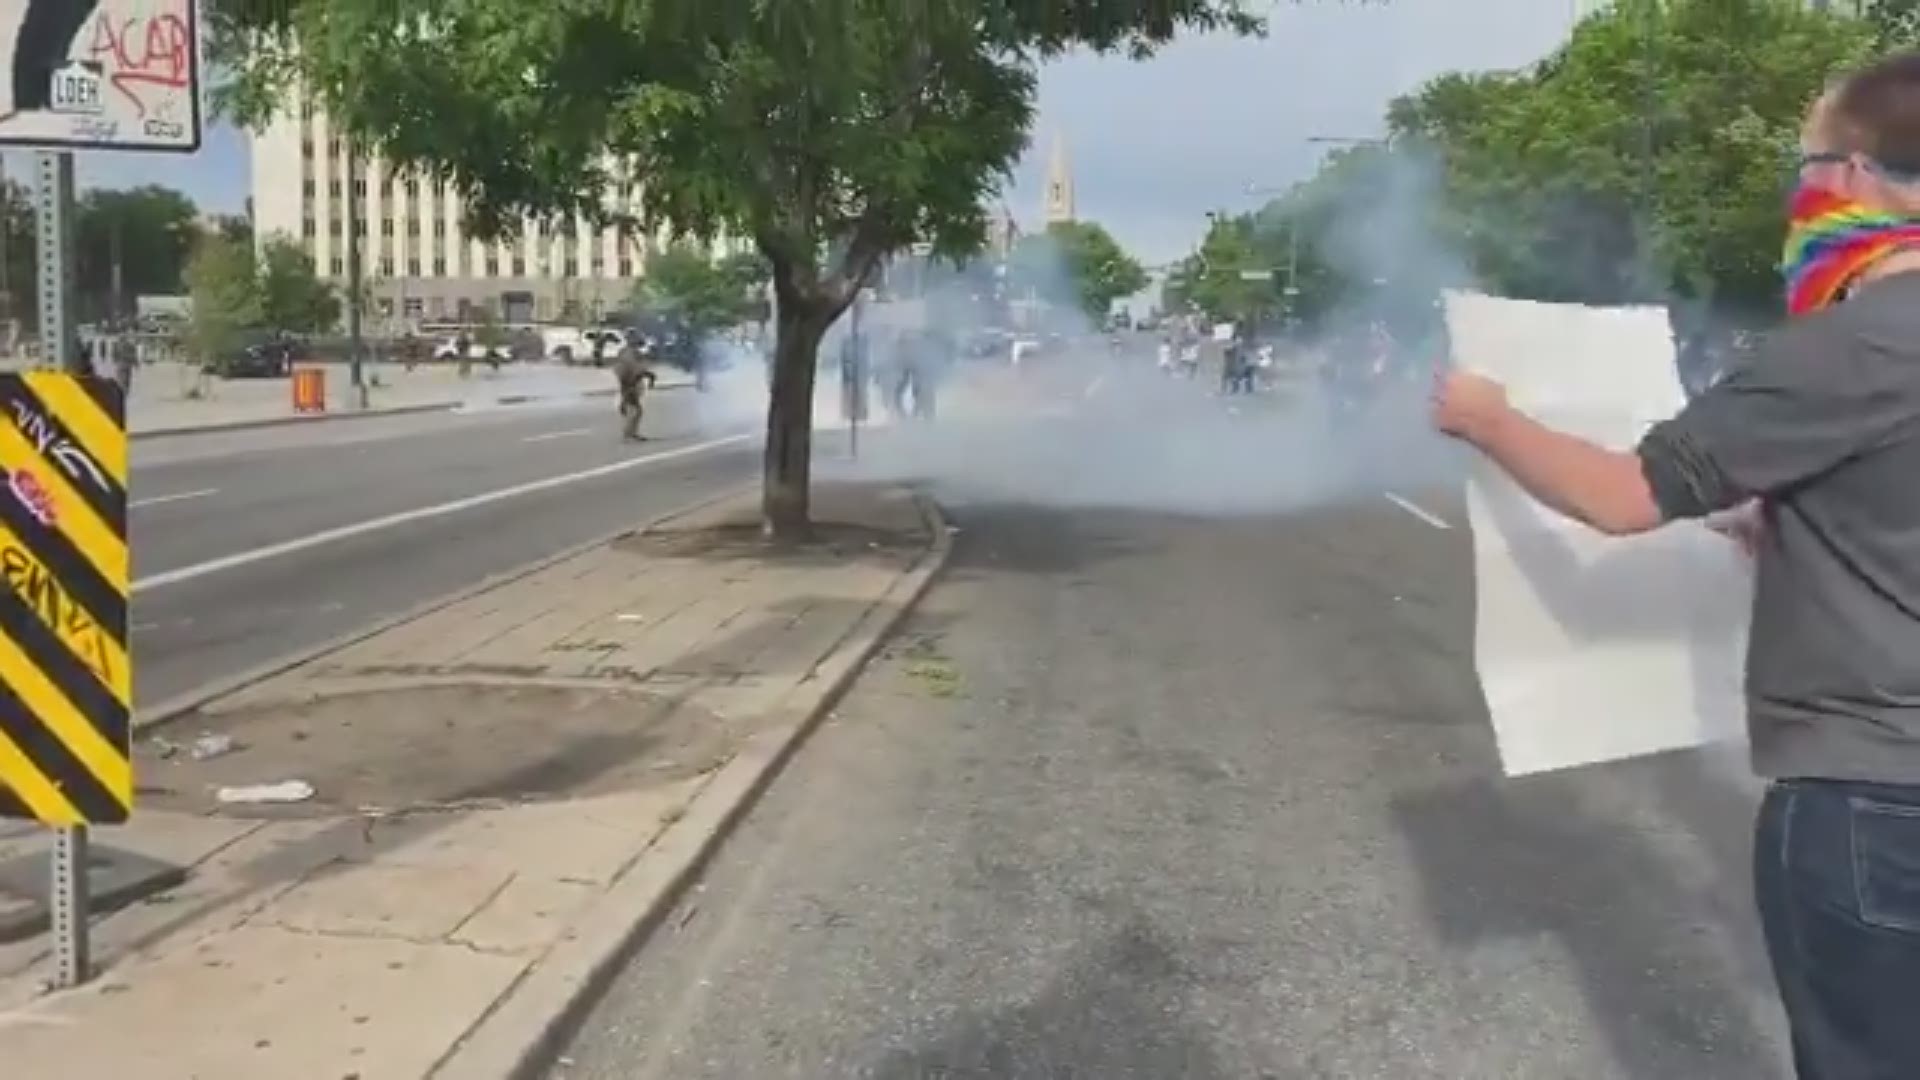 Police deployed tear gas around 6 p.m. Saturday as a crowd of people protest the death of George Floyd.